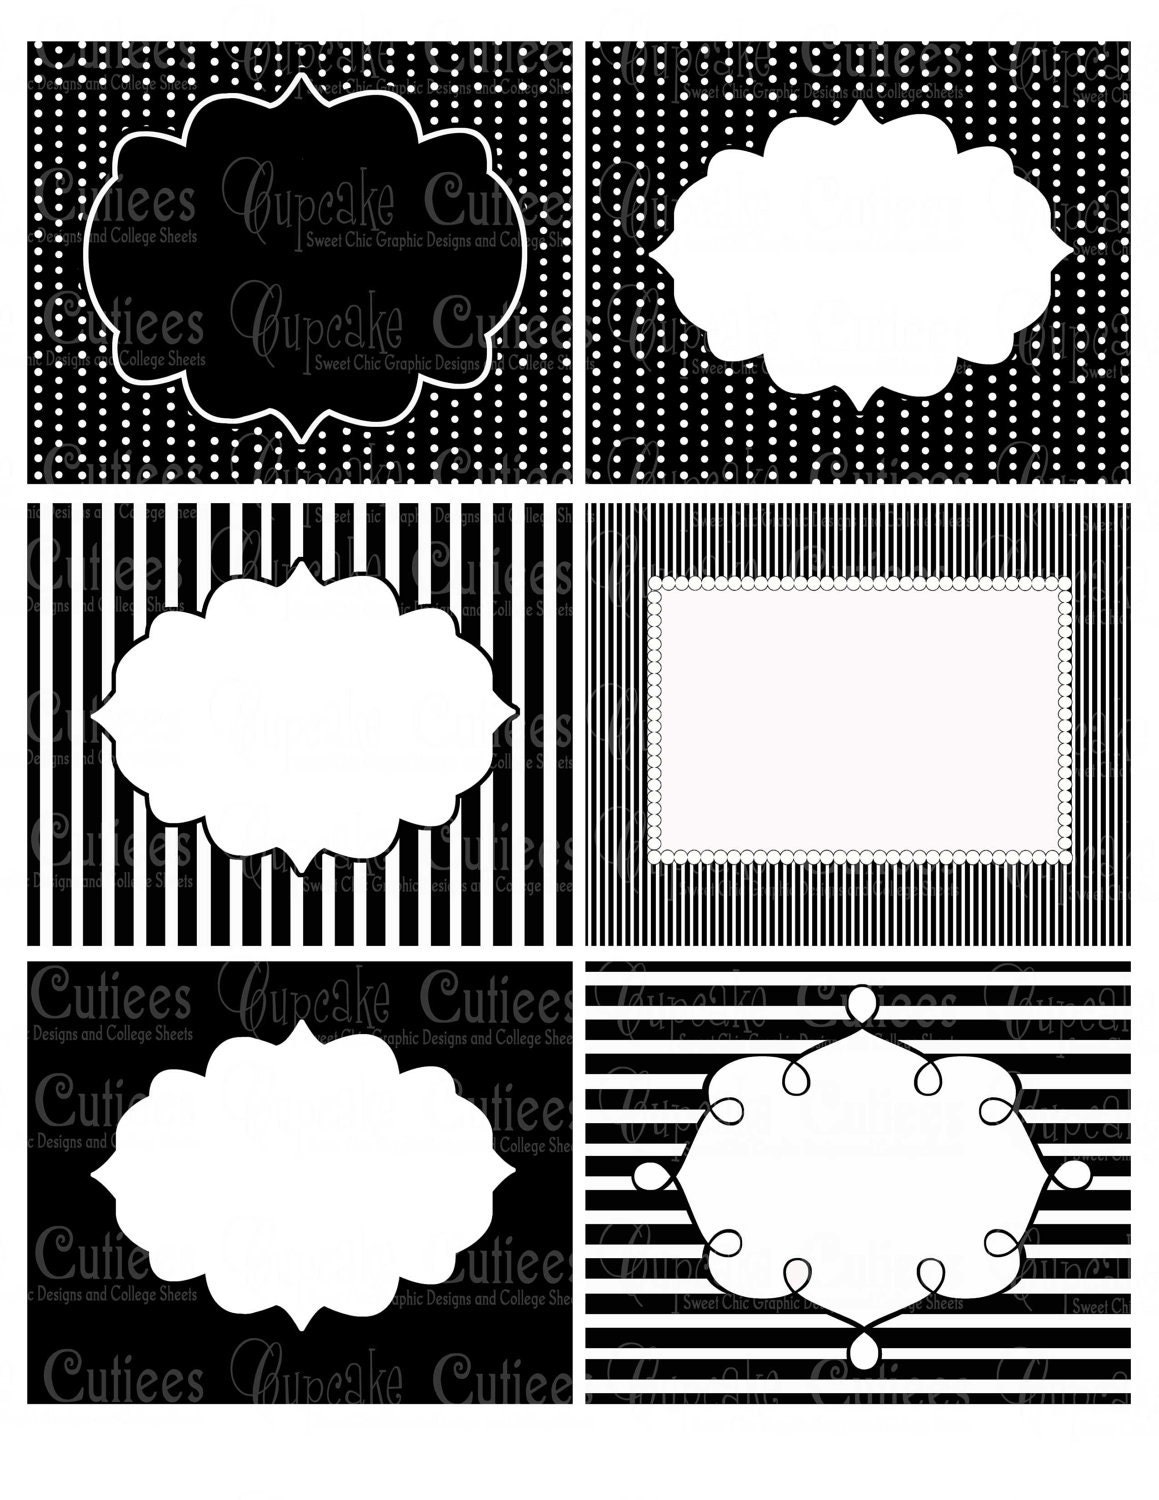 classic black and white digital collage by cupcakecutieesparty